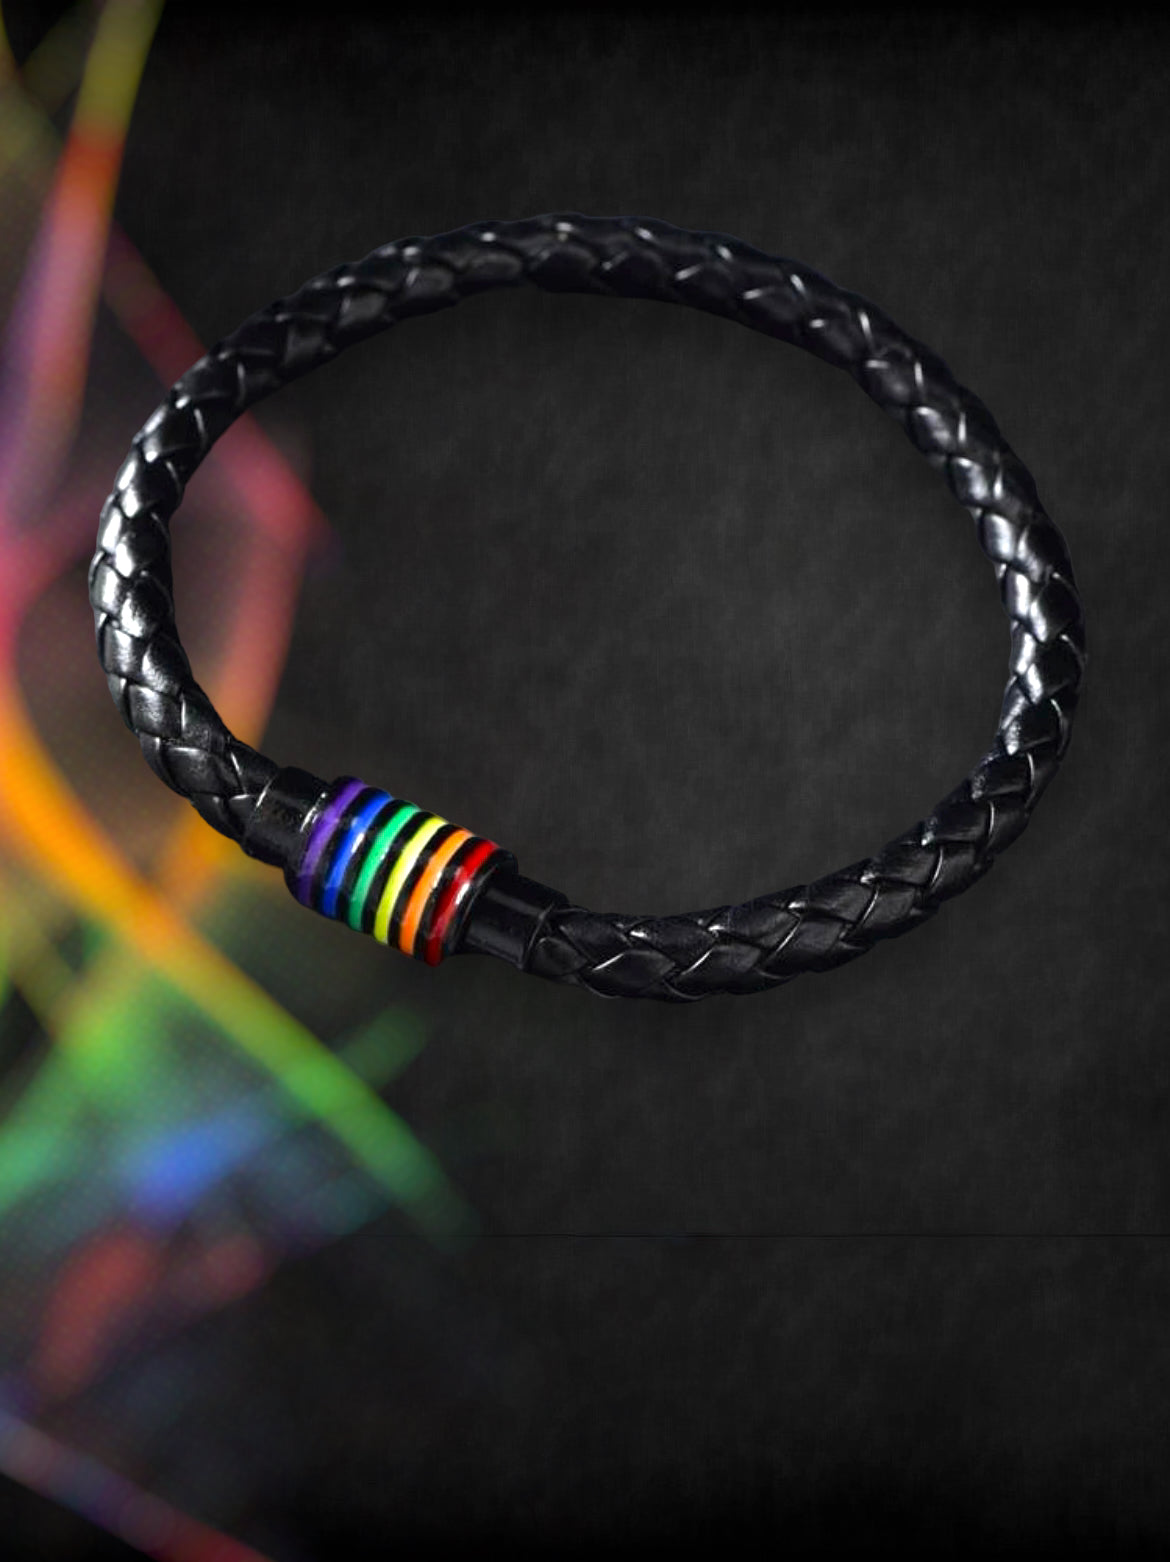 Black woven leather bracelet with striped rainbow design